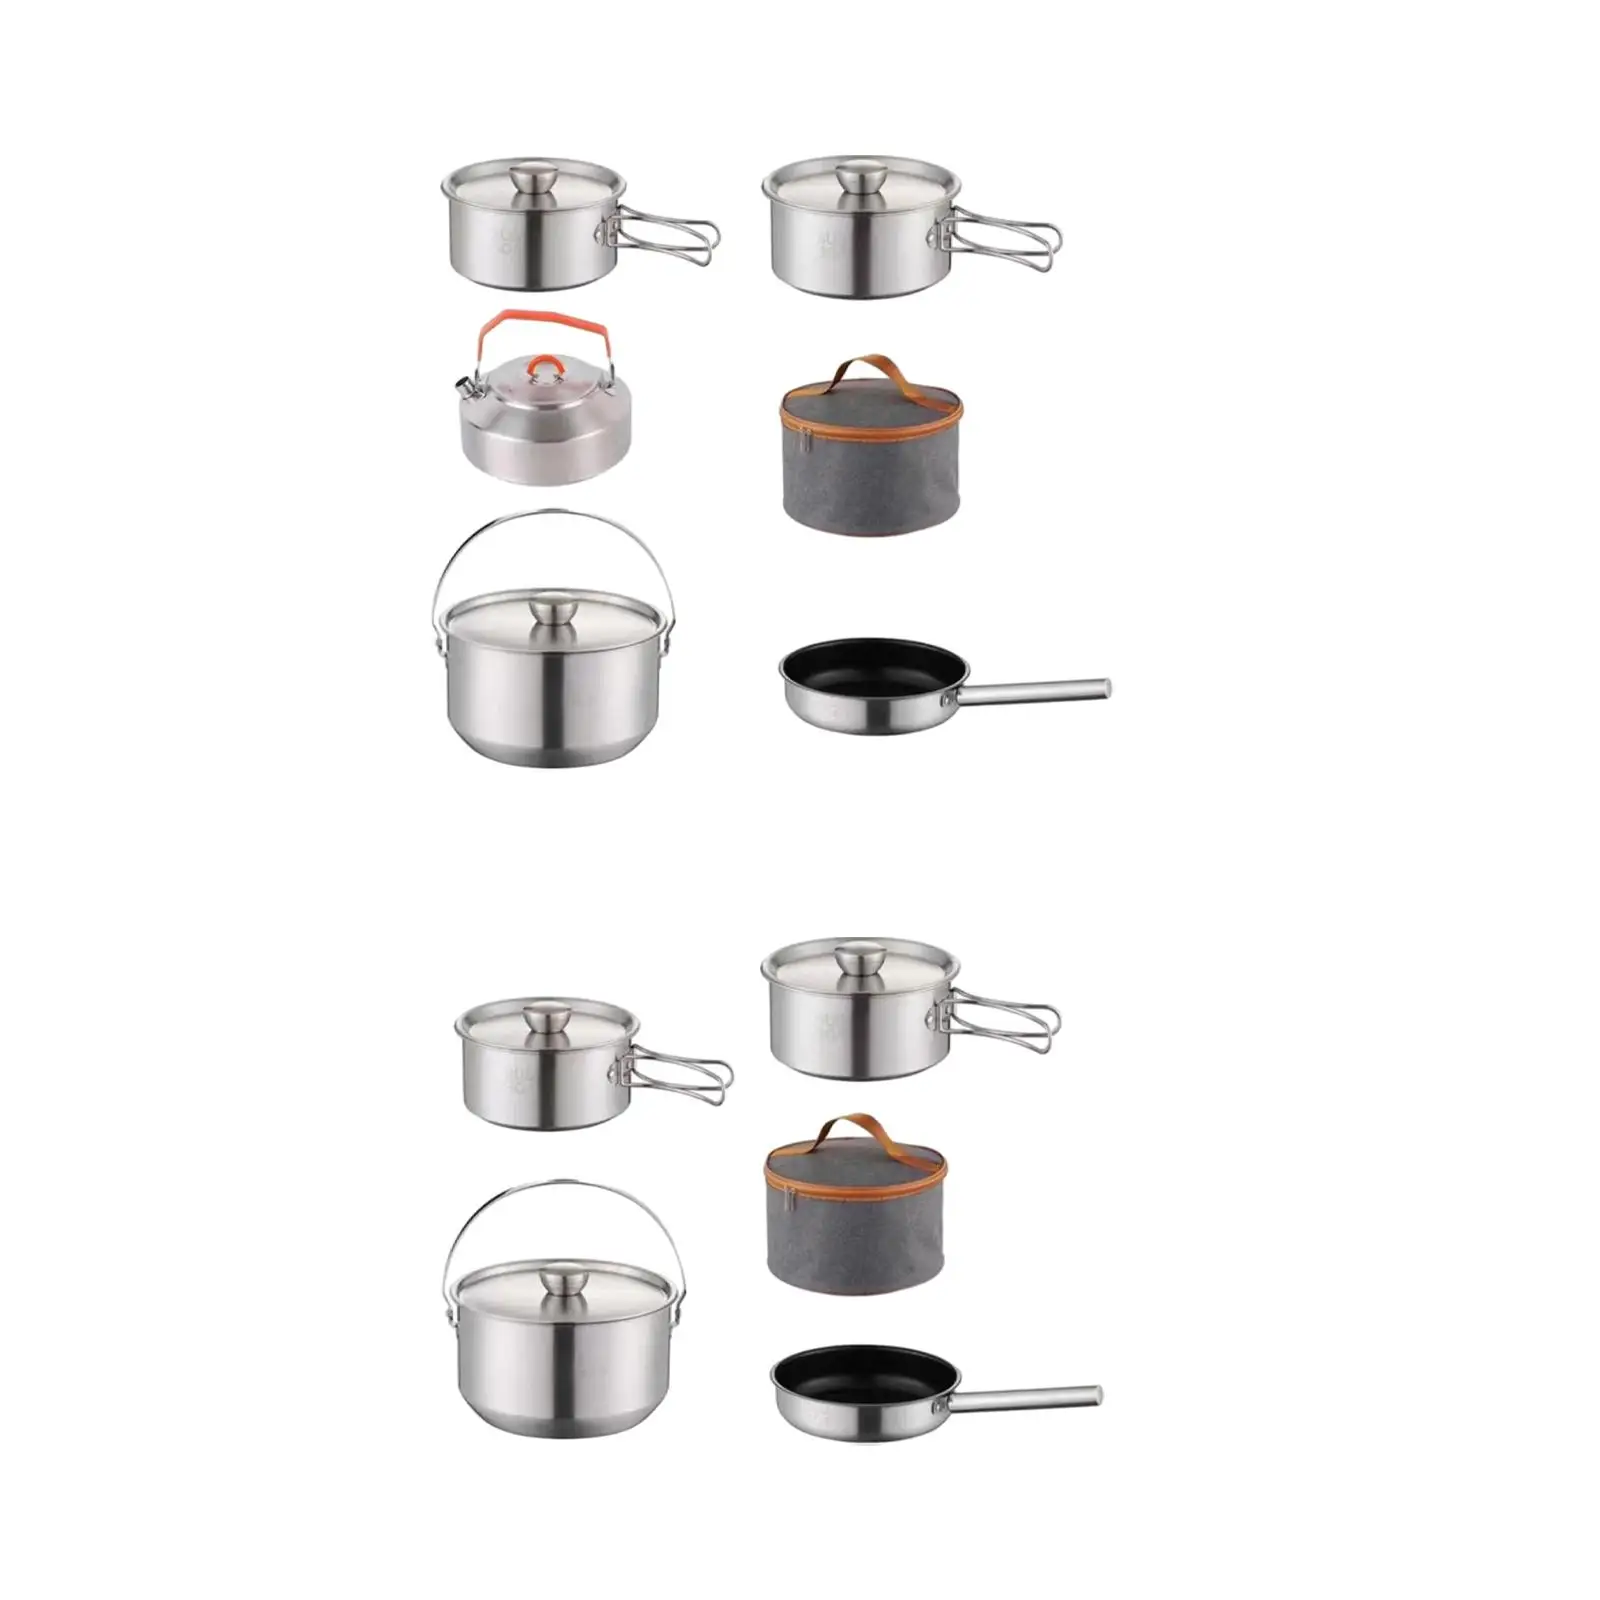 Camping Cookware Kit with Storage Bag Utensils Tableware Outdoor Pot Cooking Set for Dinner Kitchen Picnic Survival